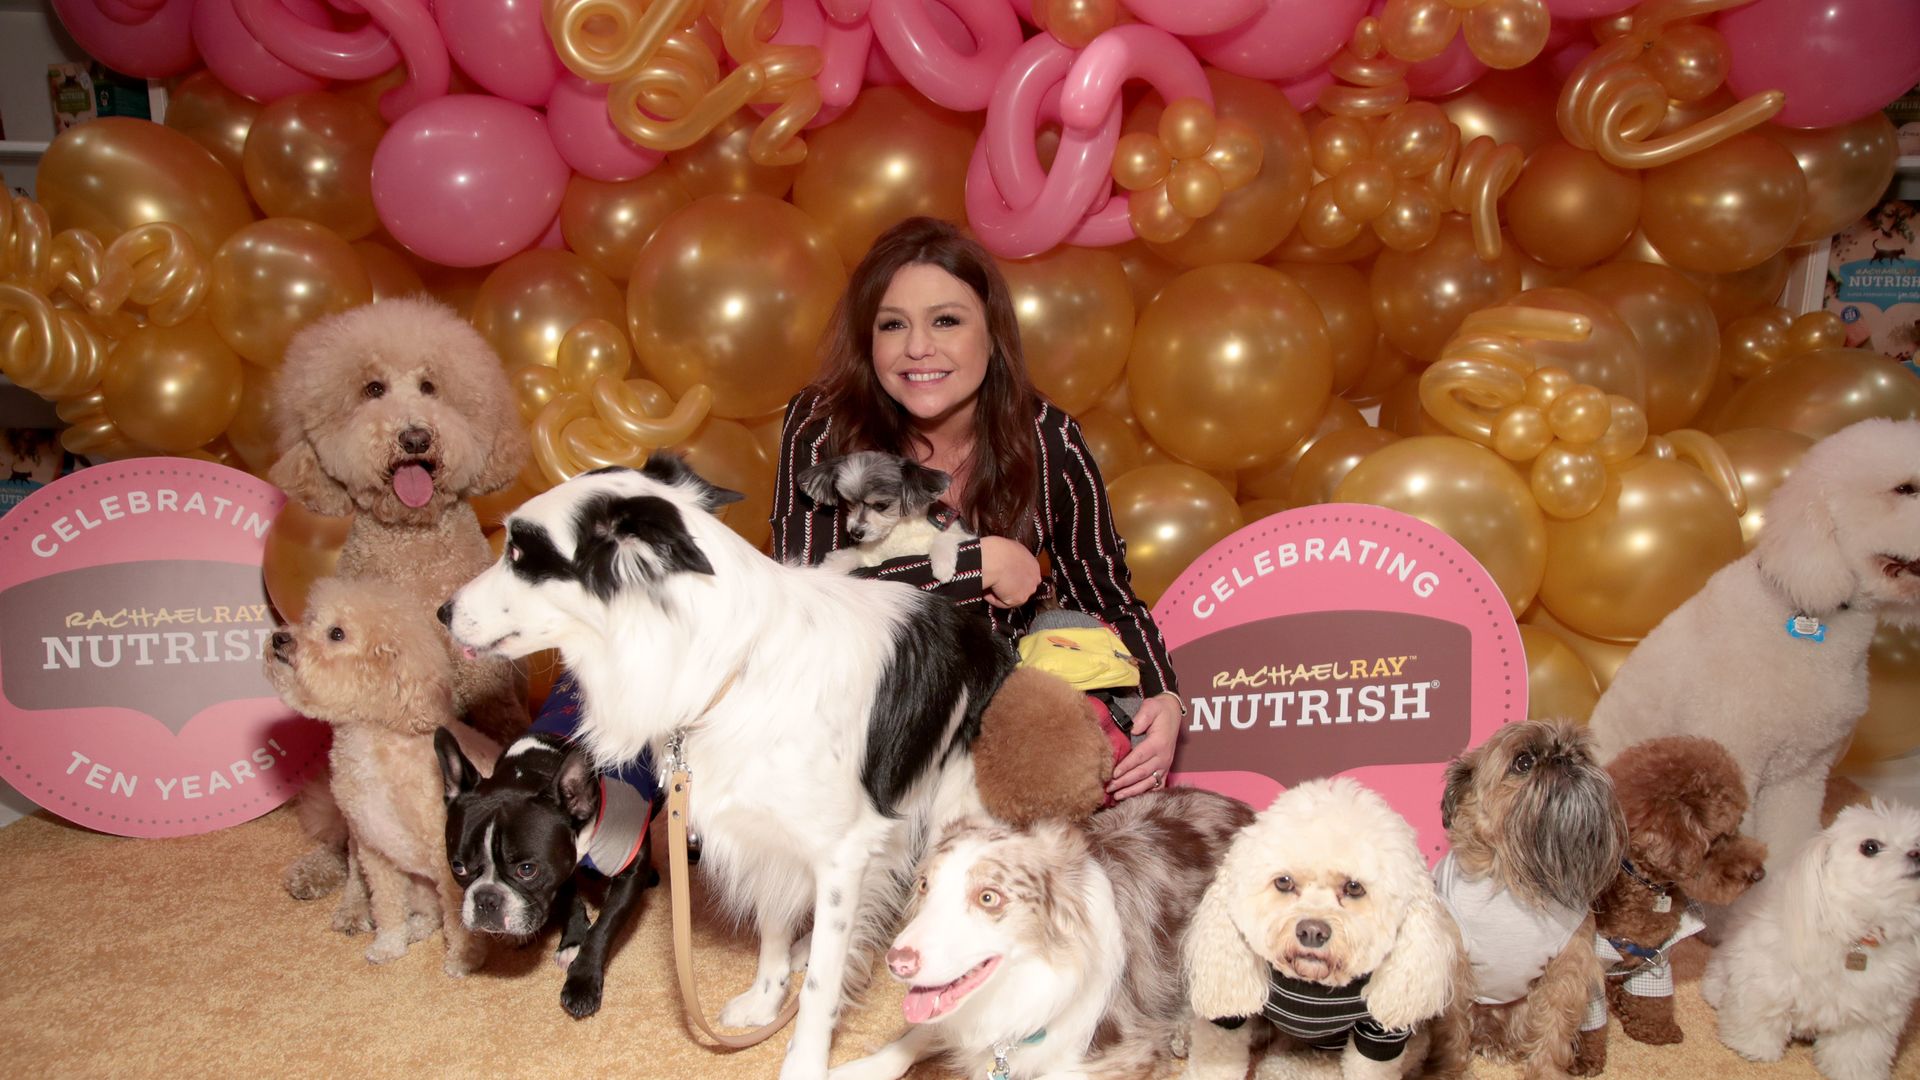 Caption: Rachael Ray at a celebration for her pet food brand, Nutrish. Photo: Cindy Ord/Getty Images for Nutrish